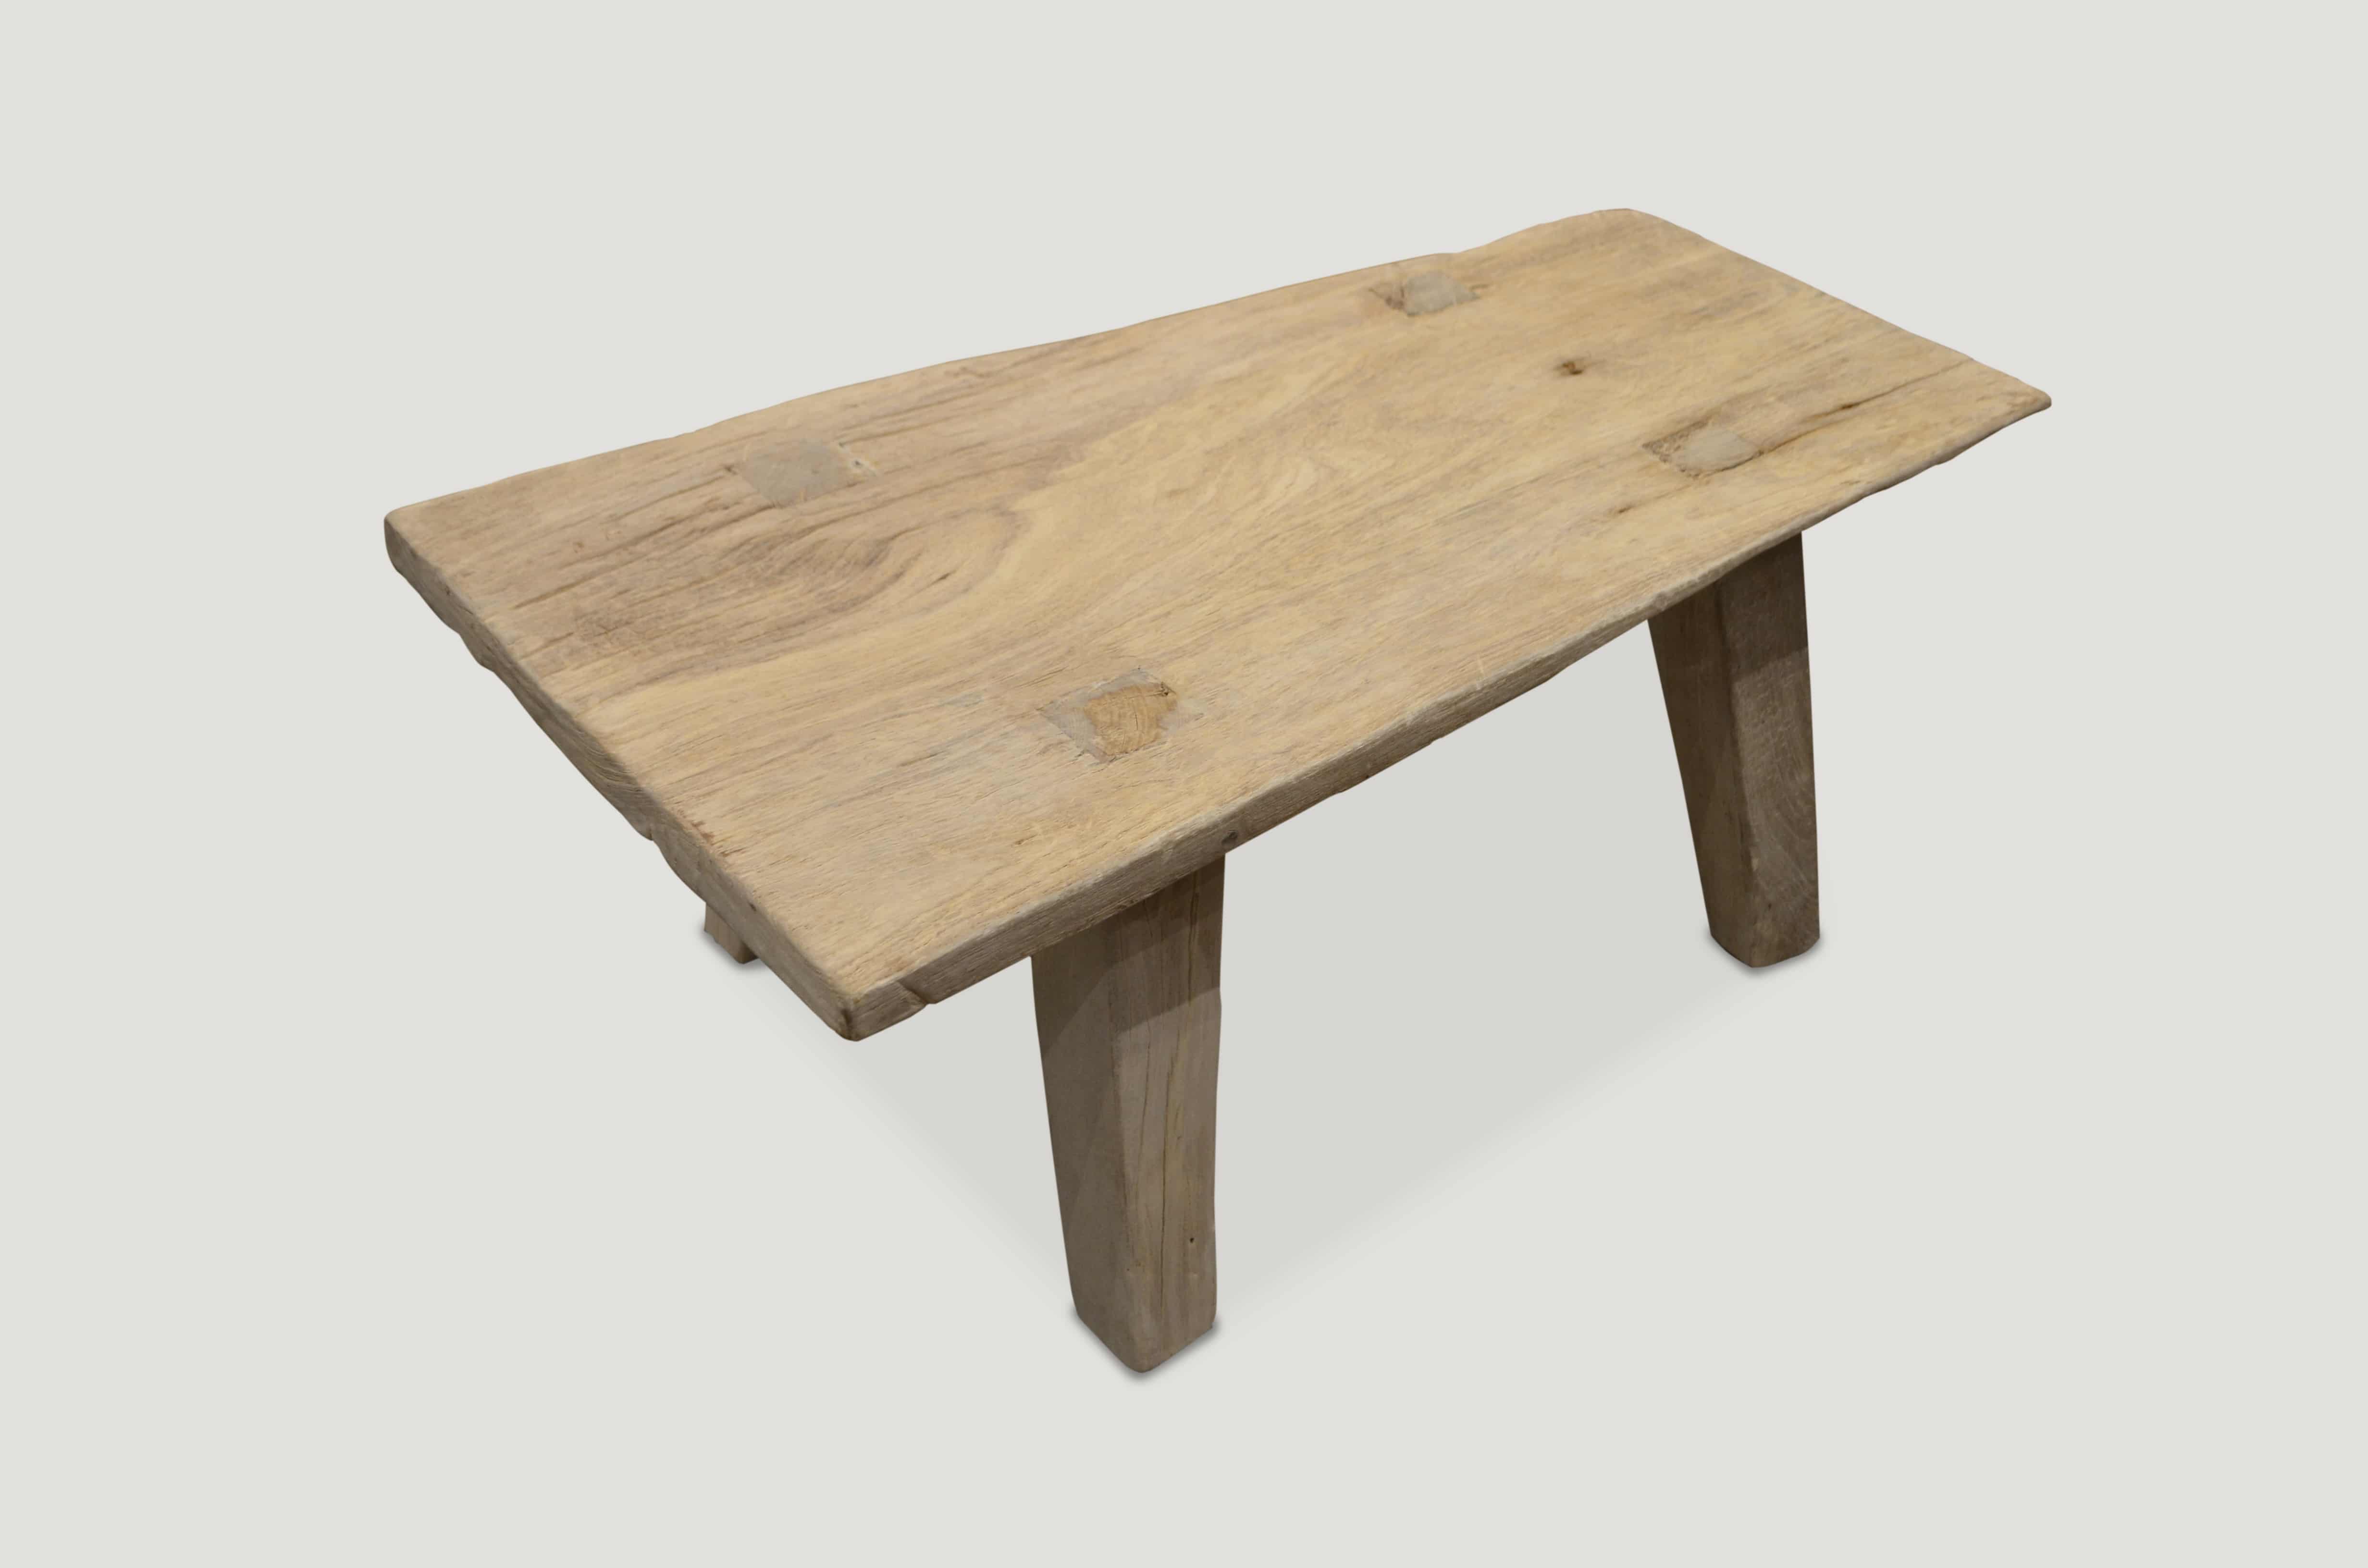 BLEACHED TEAK SIDE TABLE, COFFEE TABLE OR BENCH